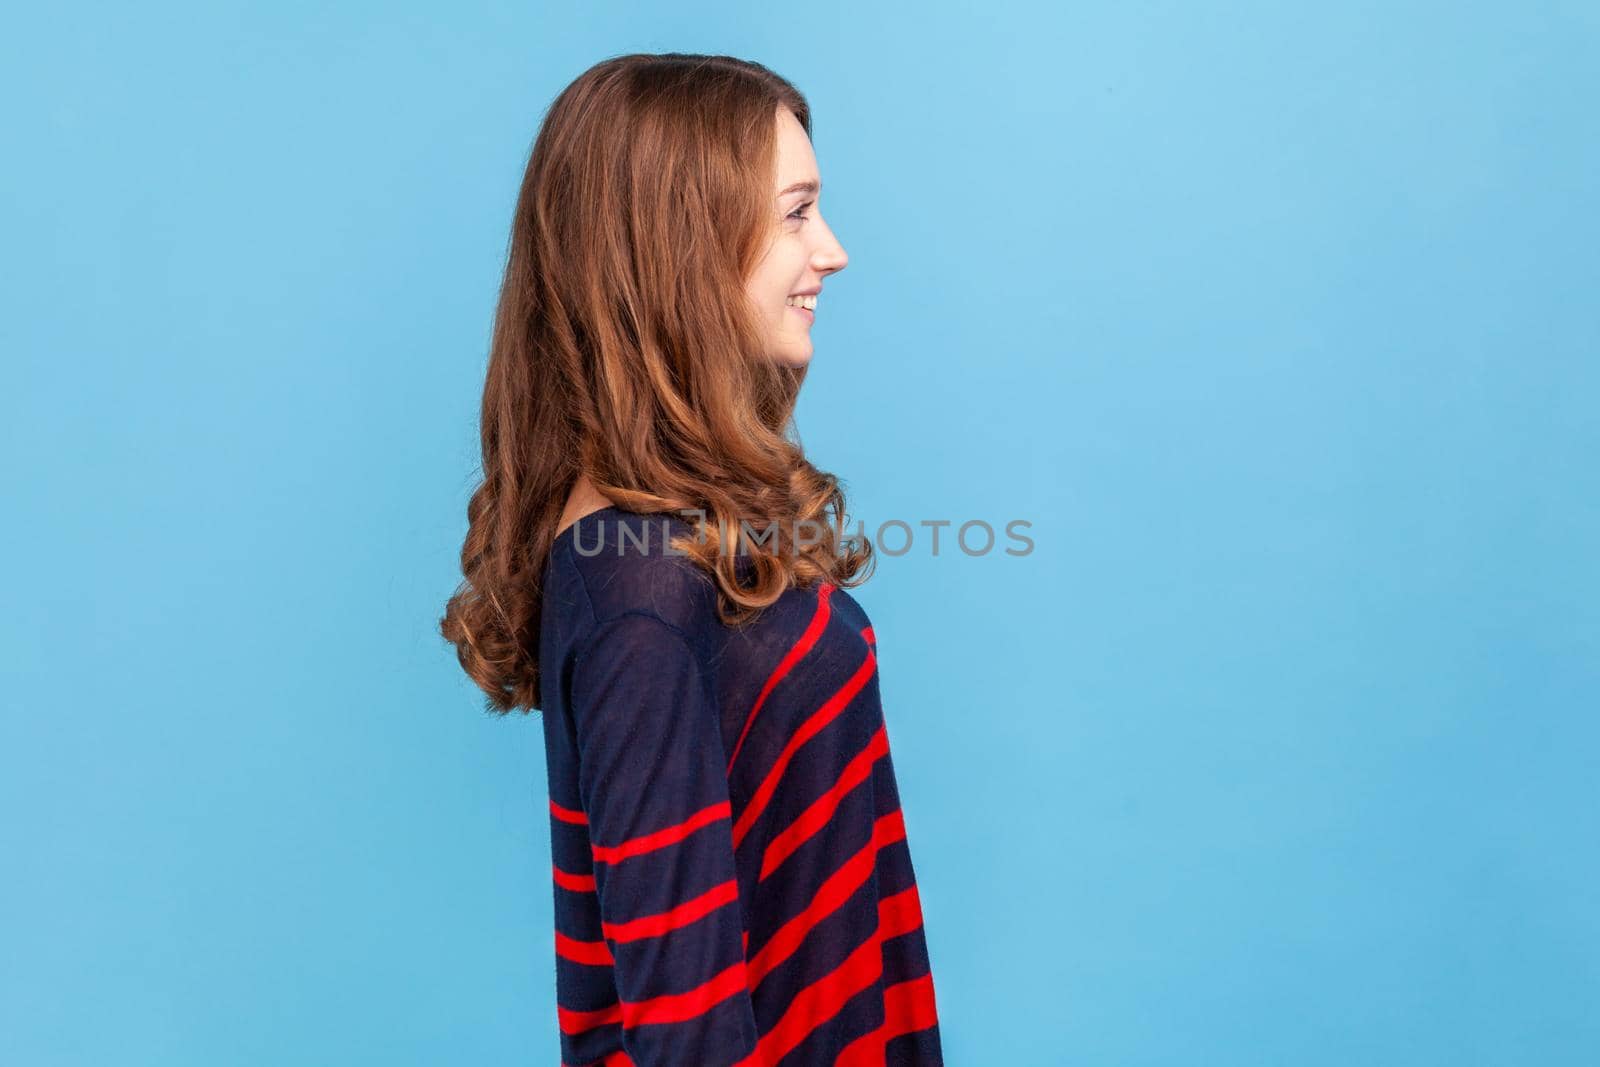 Side view of smiling woman wearing striped casual style sweater standing and looking ahead, having positive expression, being in good mood. Indoor studio shot isolated on blue background.